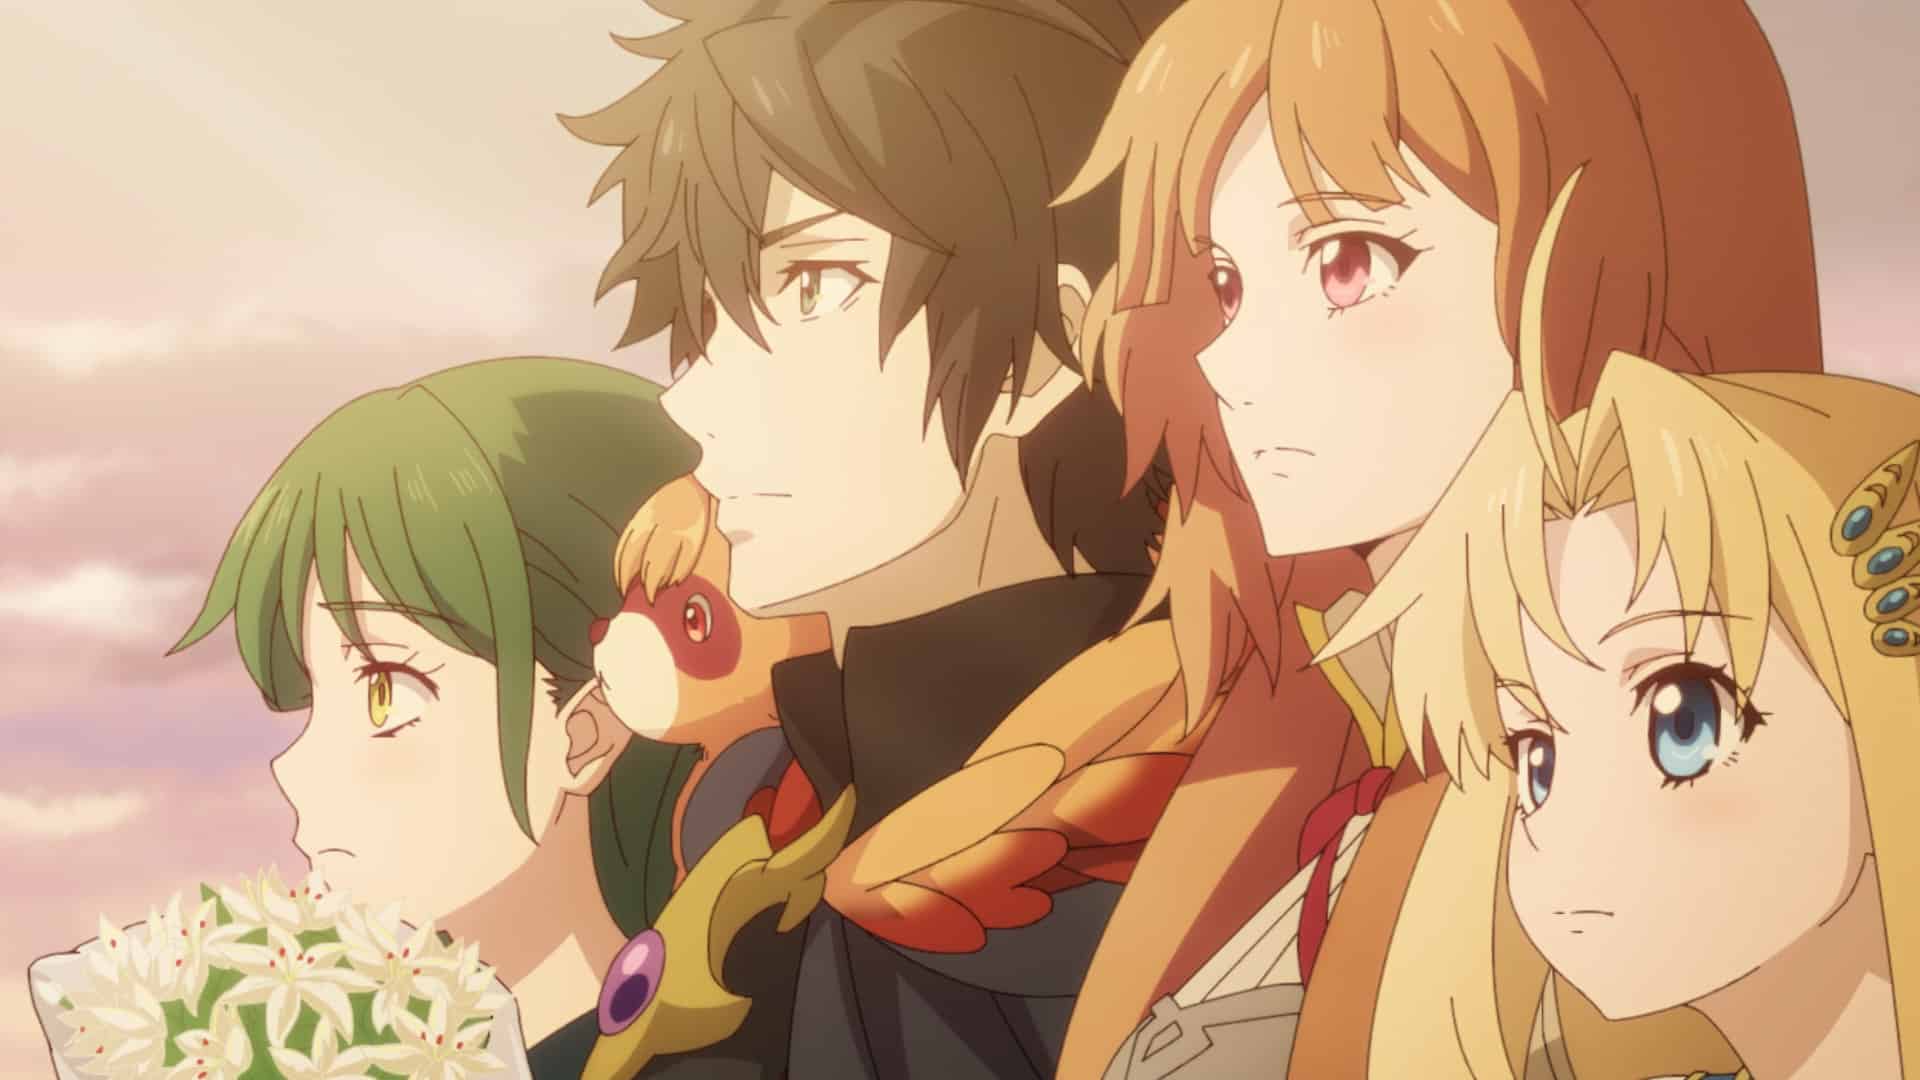 Best Anime Show With Best Storyline: The Rising Of The Shield Hero